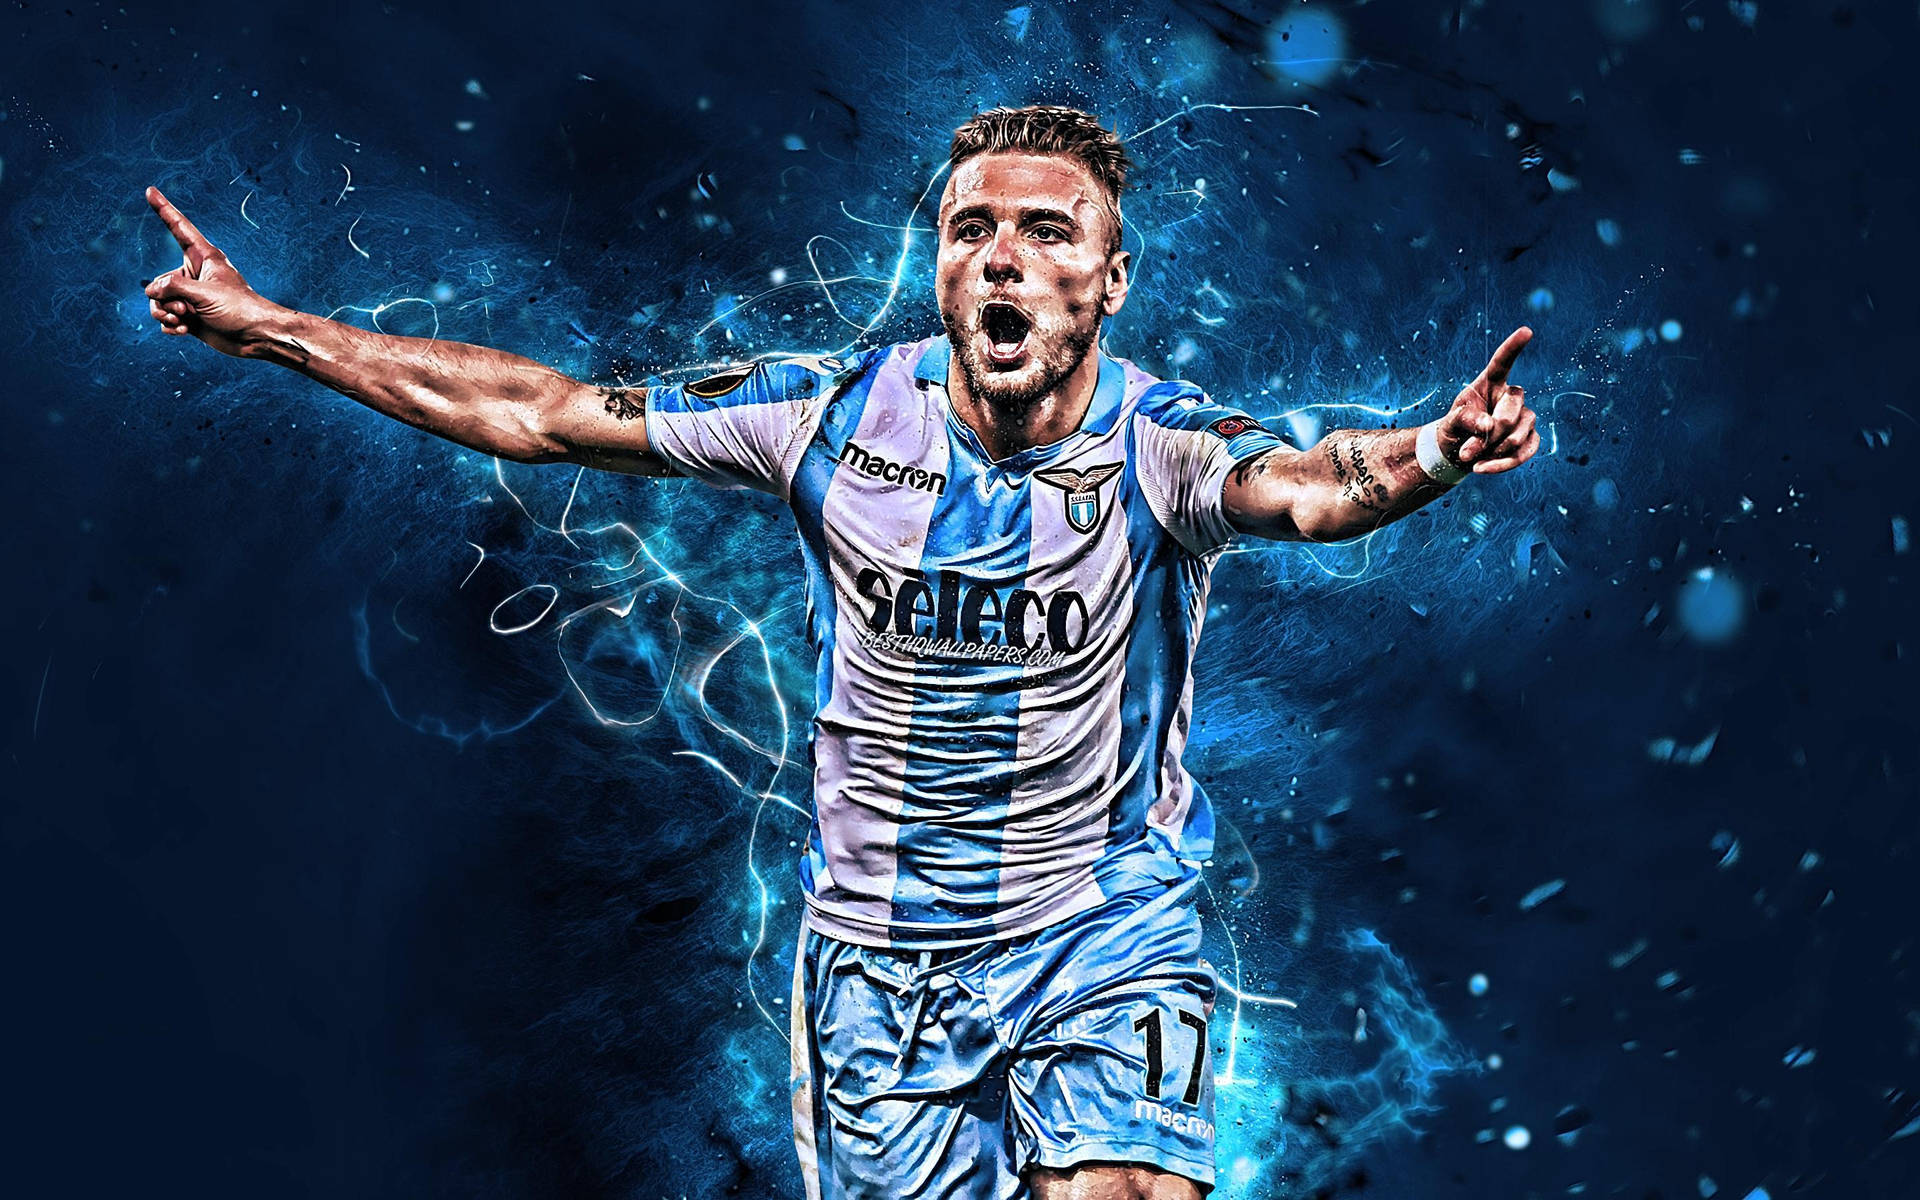 Ciro Immobile In Action On The Field Wallpaper